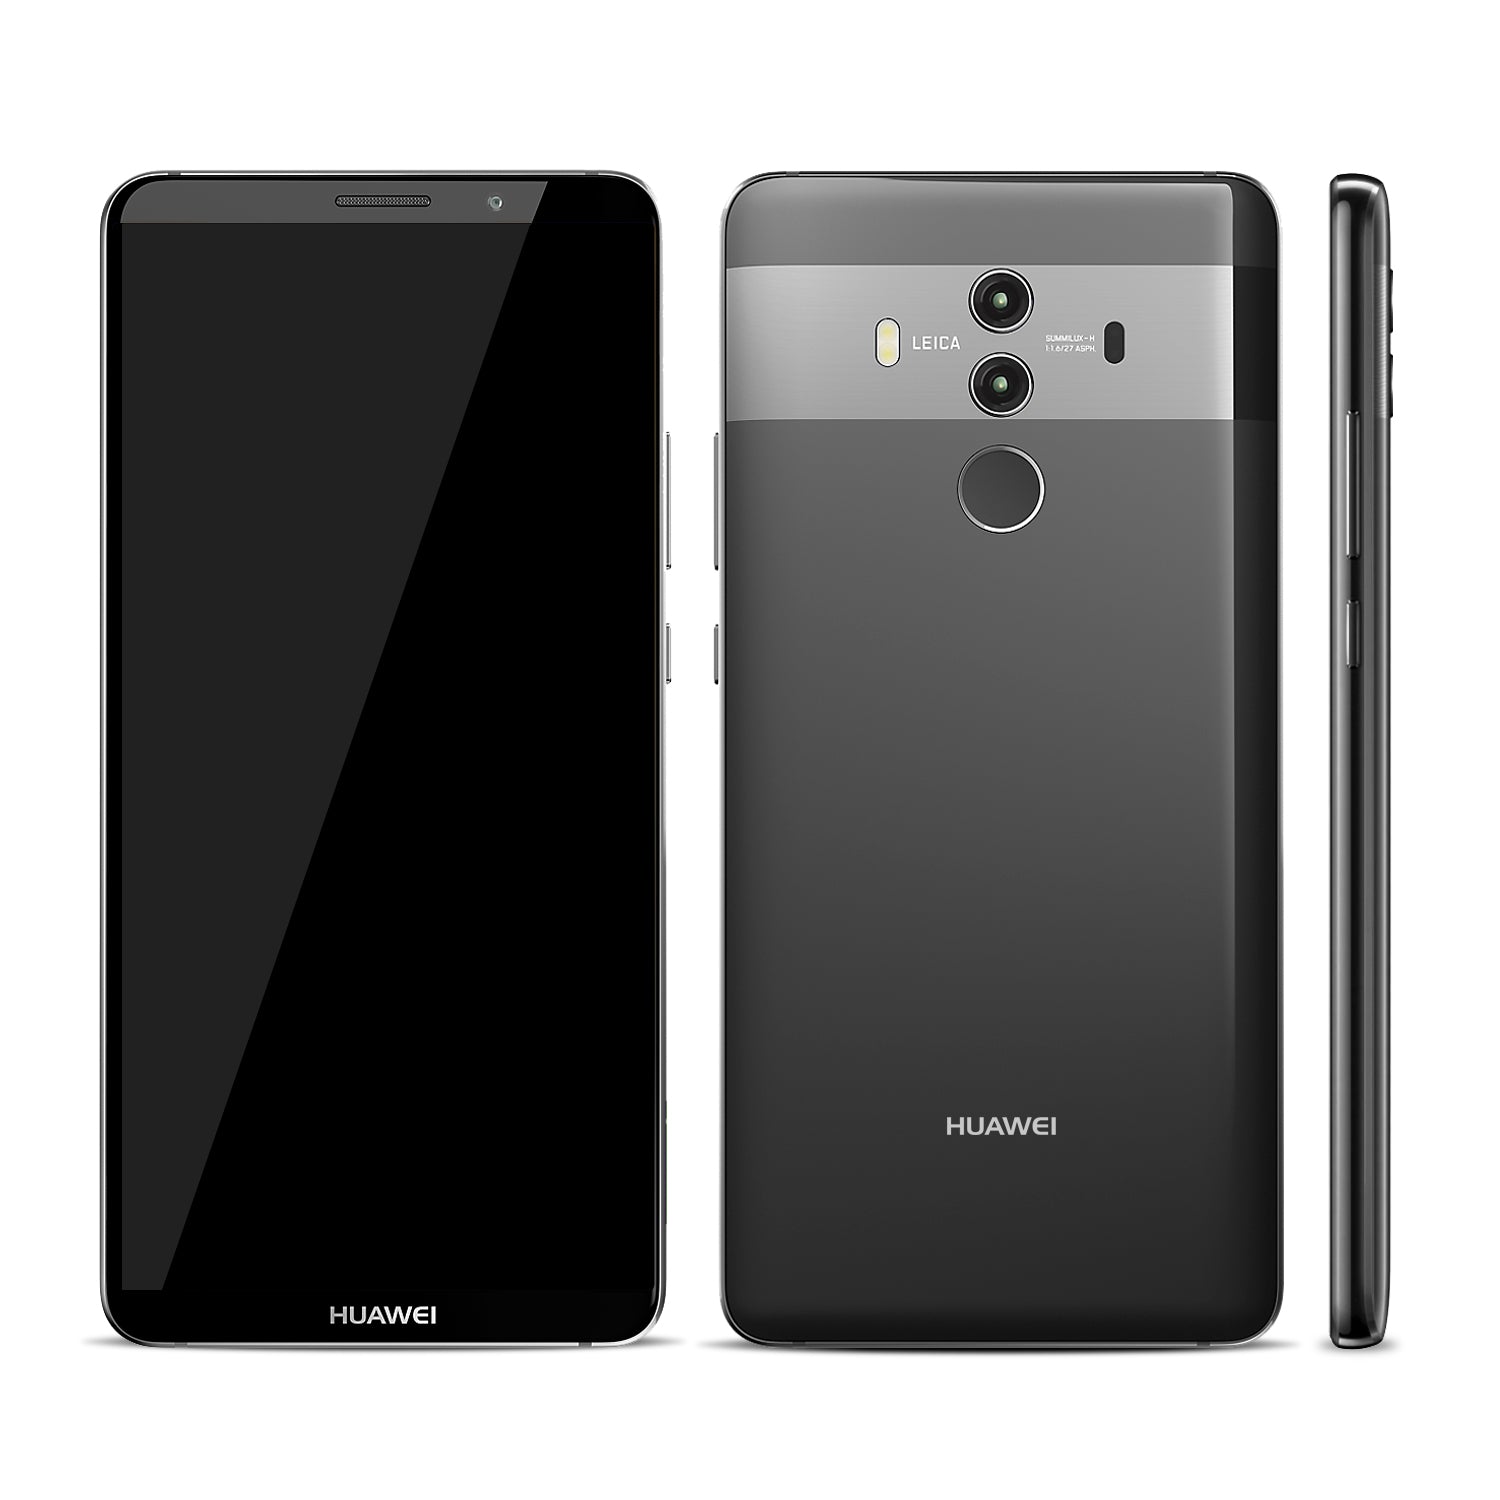 X285 mobil 10 product 10 y mate huawei mate vs redmi note